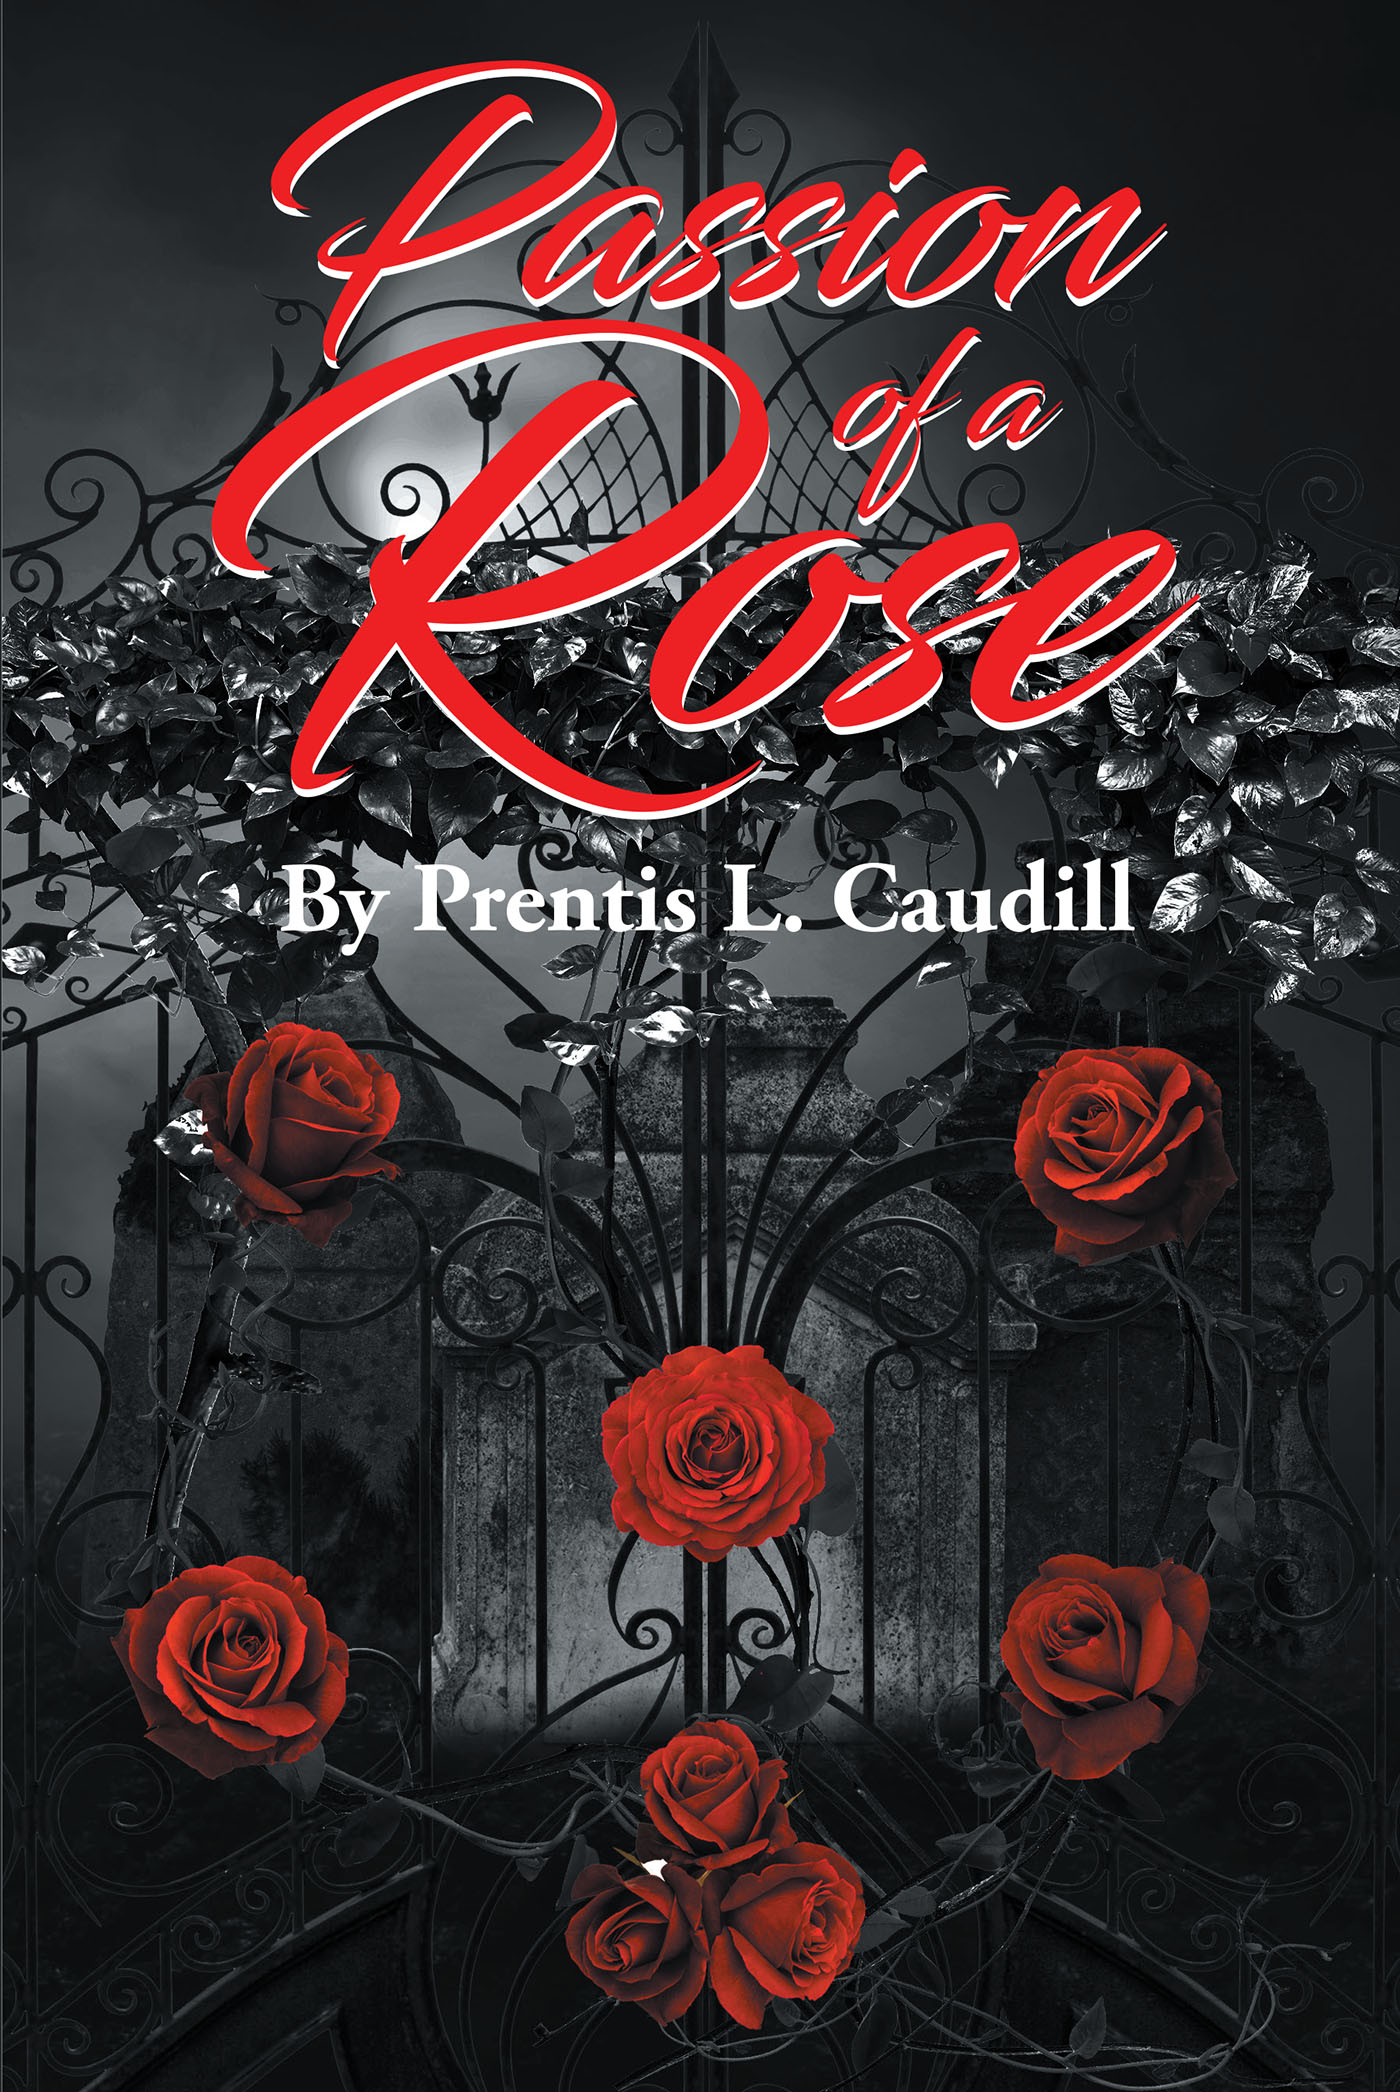 Author Prentis Caudill’s New Book, "Passion of a Rose," is a Powerful Book Full of Beautiful and Meaningful Poems Designed to Brighten All Reader’s Lives